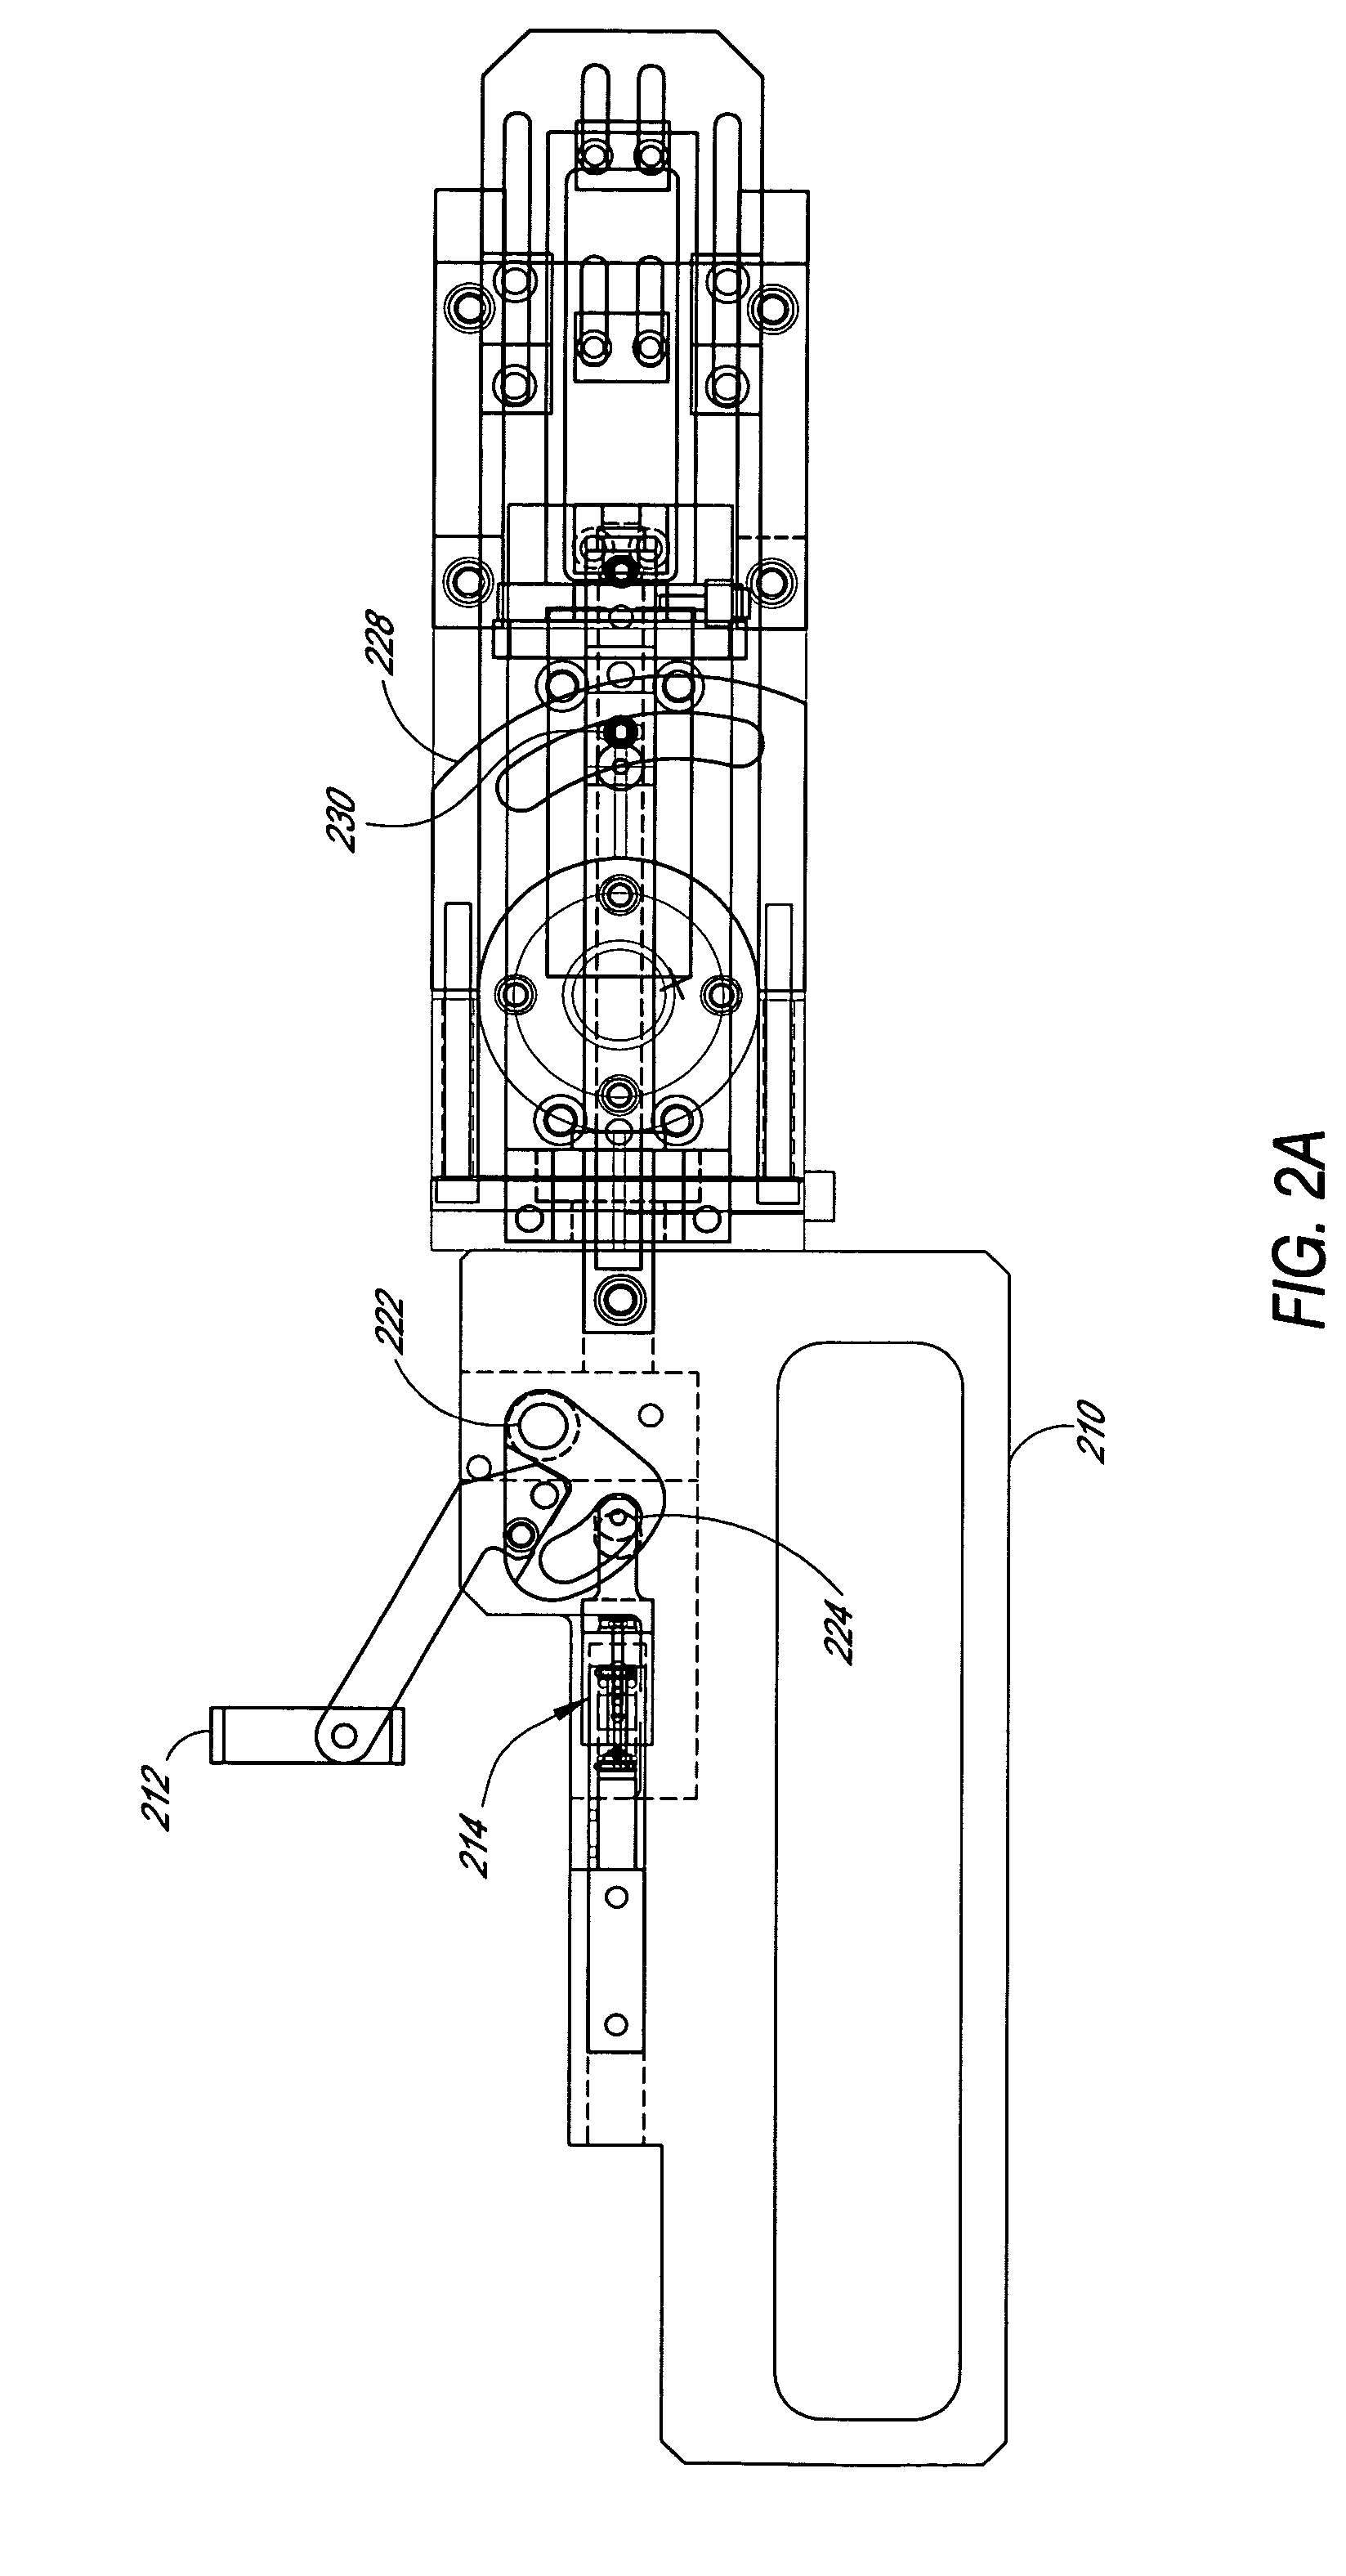 Hand-actuated articulating surgical tool